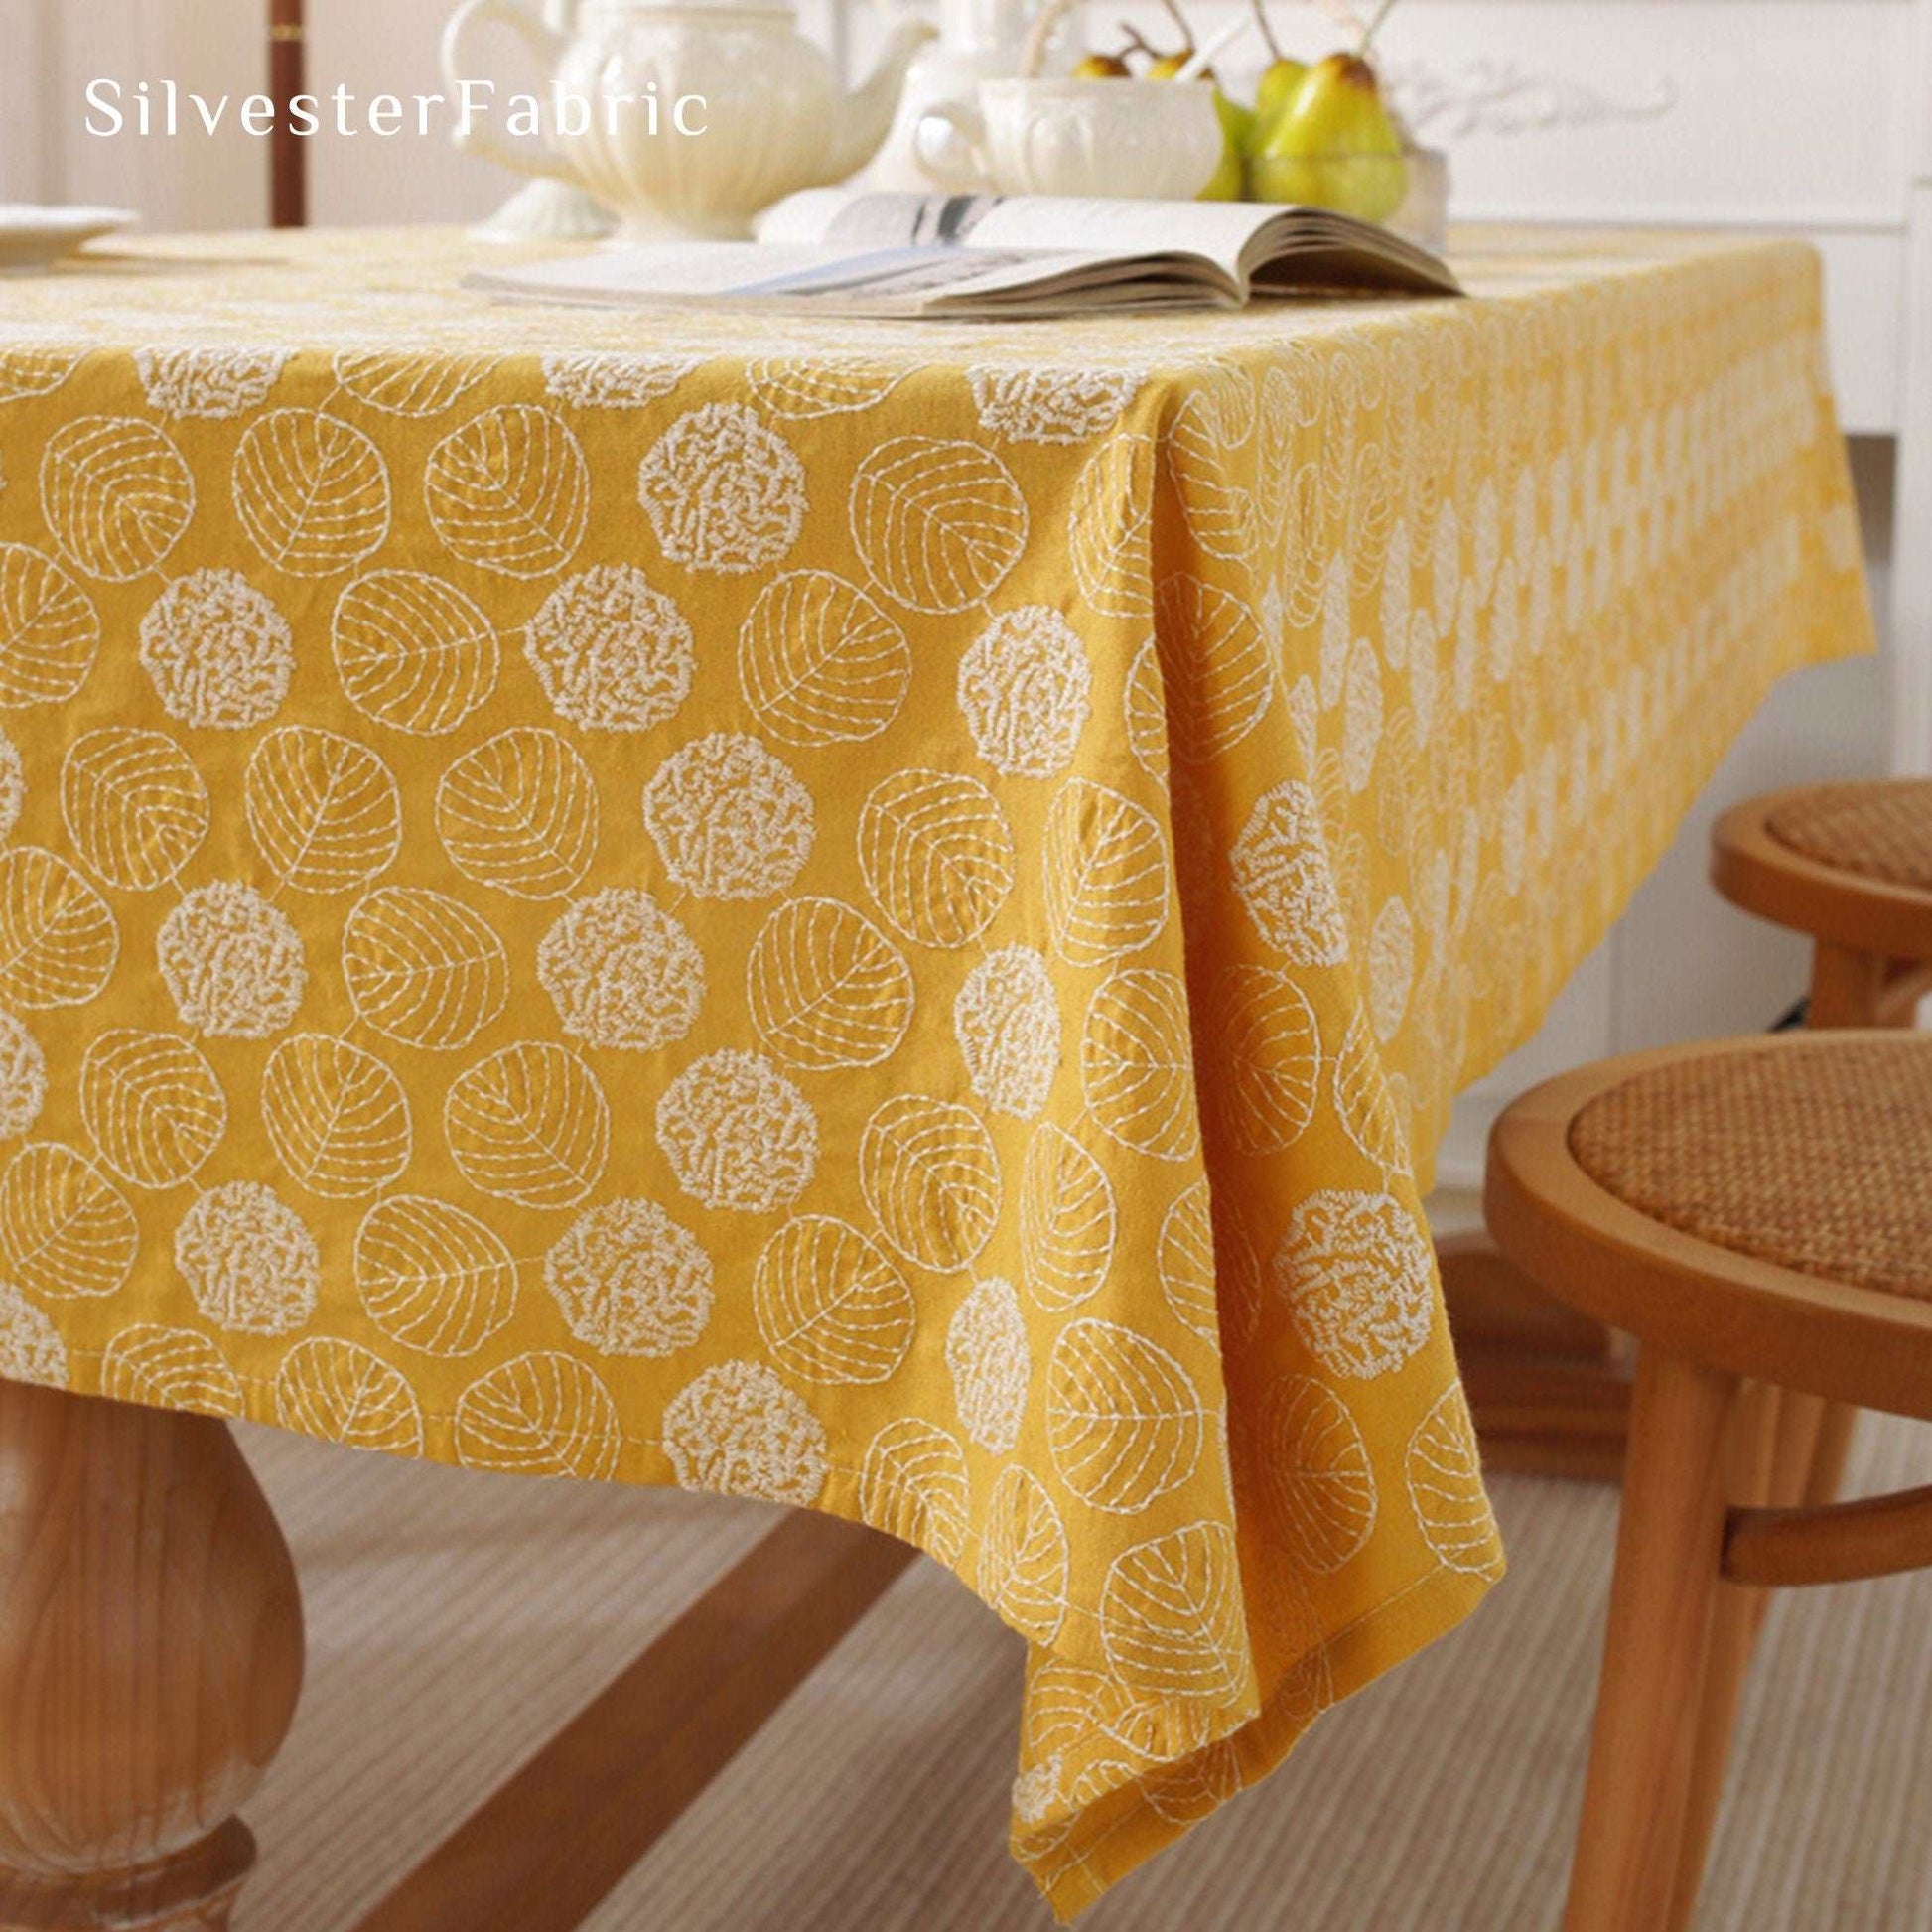 Leaf Embroidered Yellow Tablecloth丨Free Shipping - Silvester Fabric